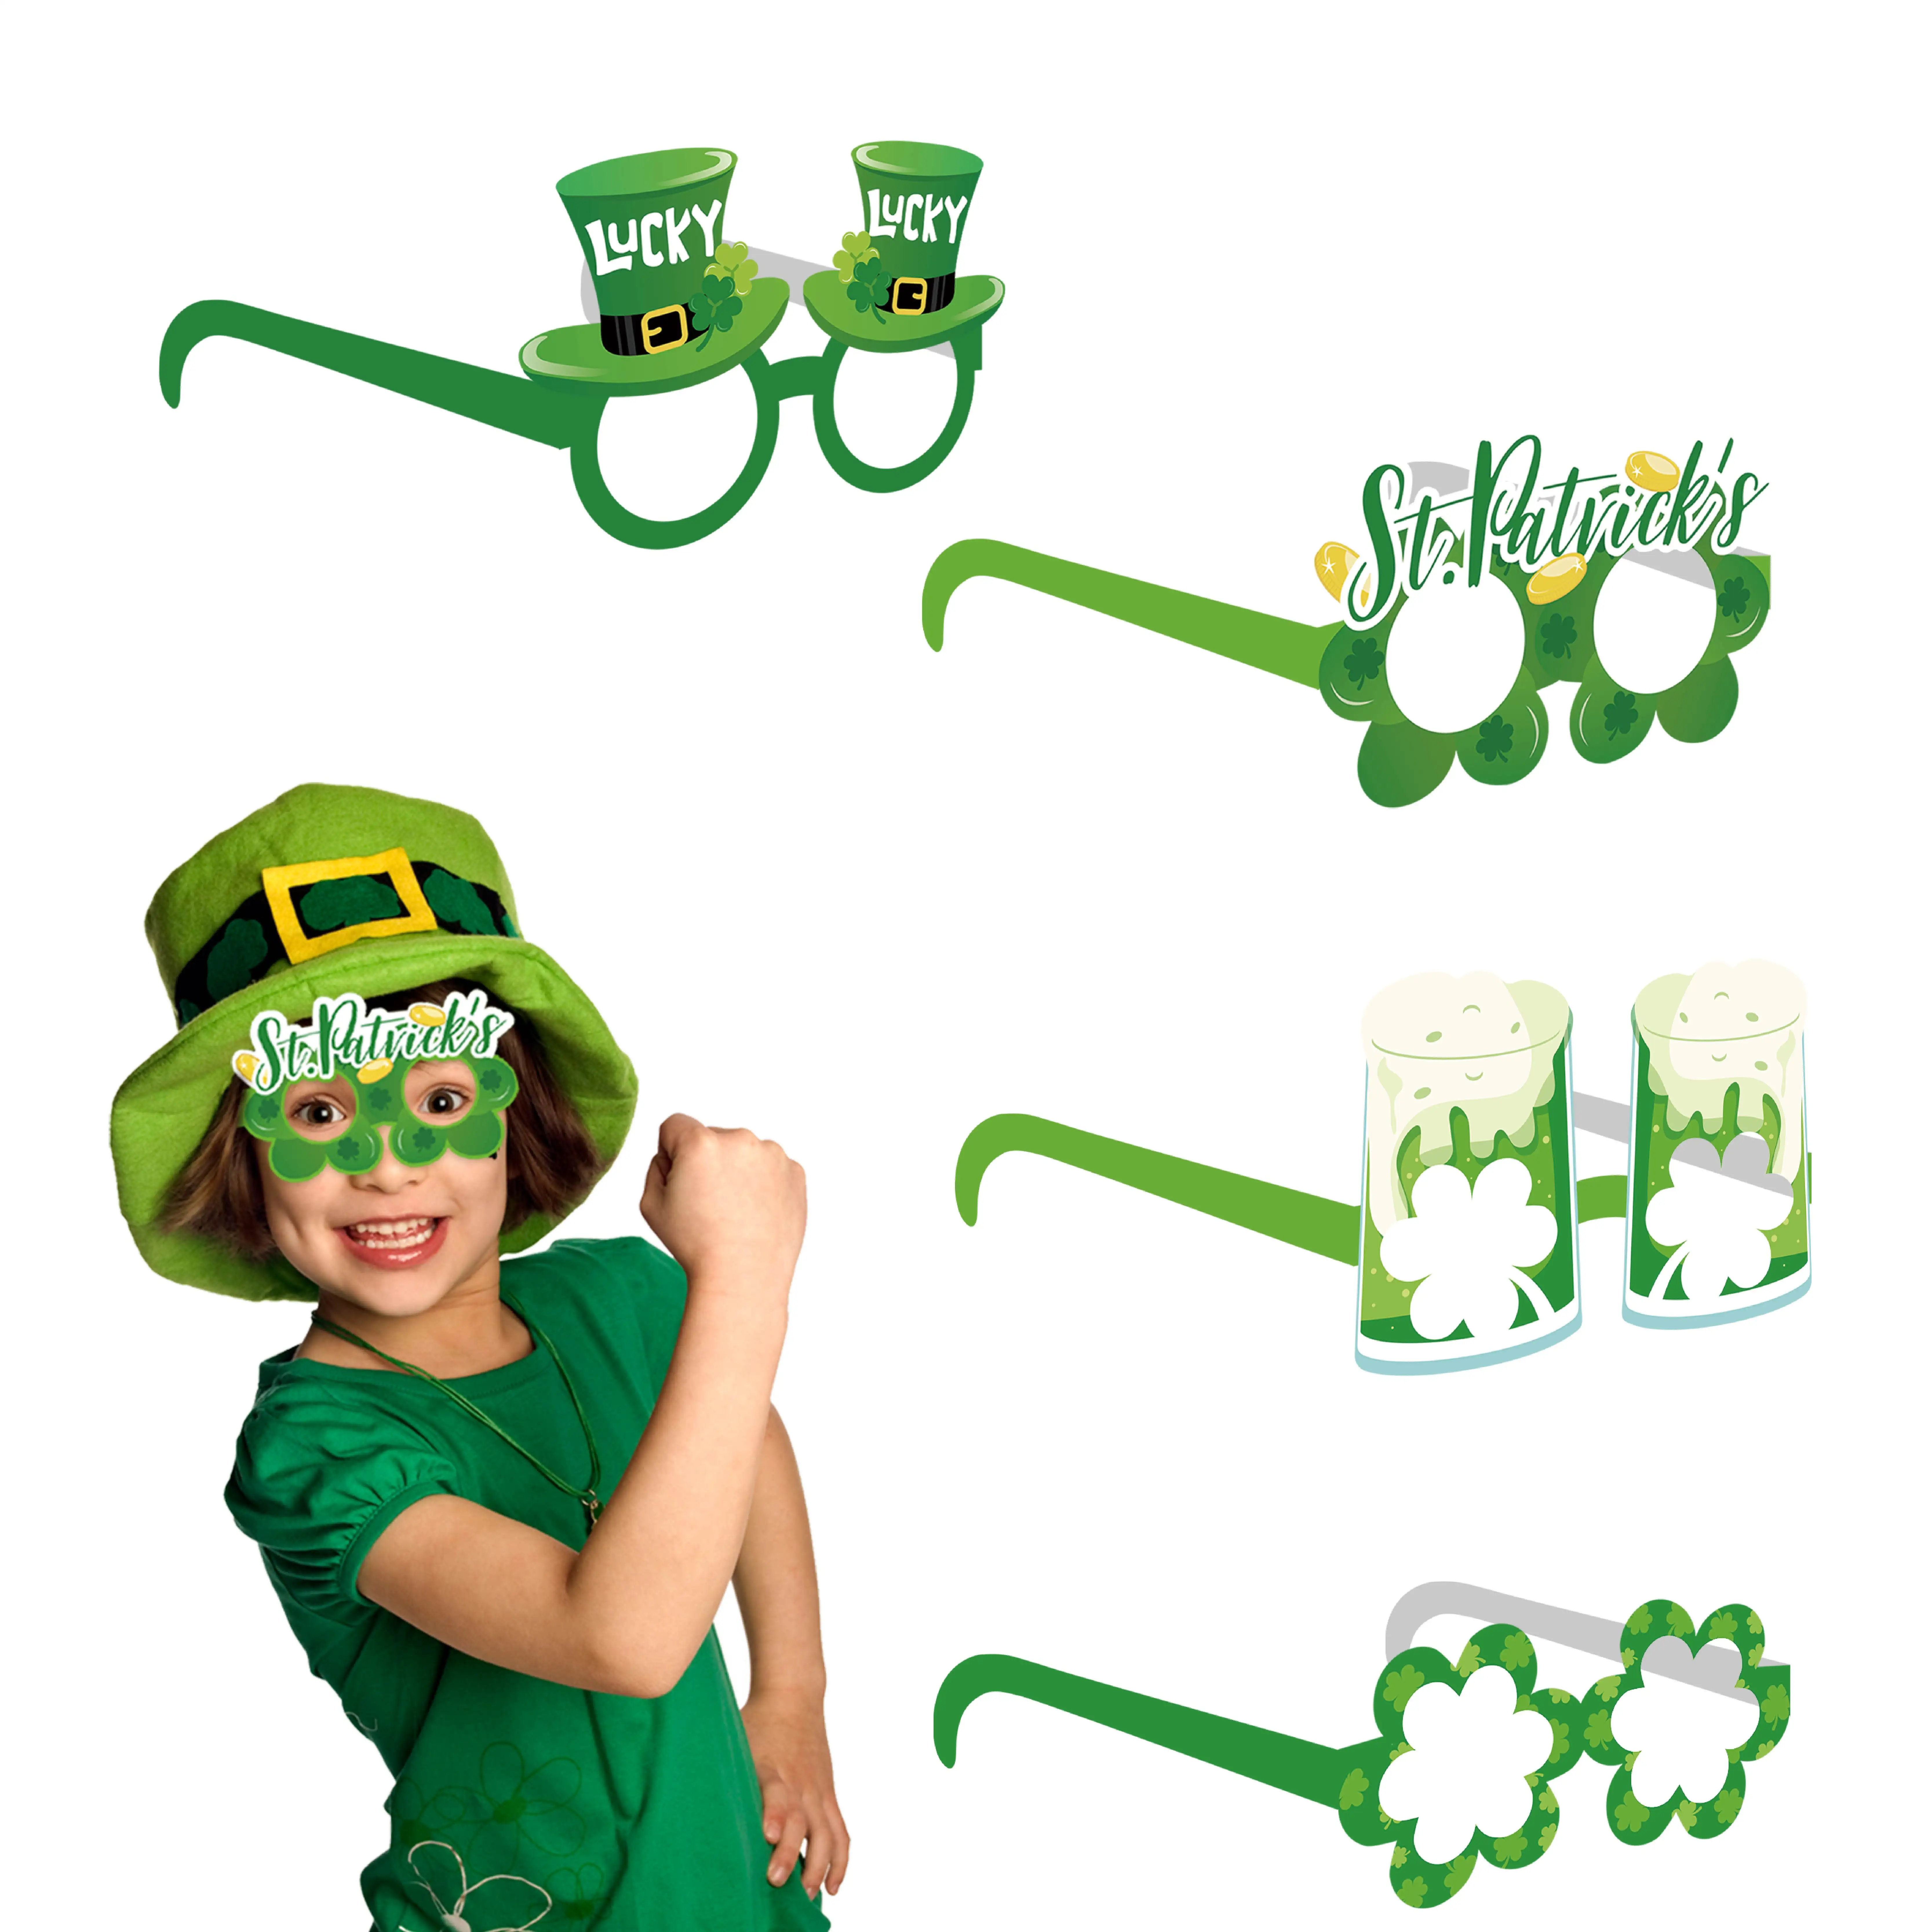 St Patricks Day Decorations Party Glasses Shamrocks Paper Decorations Green Party Decorations Supplier